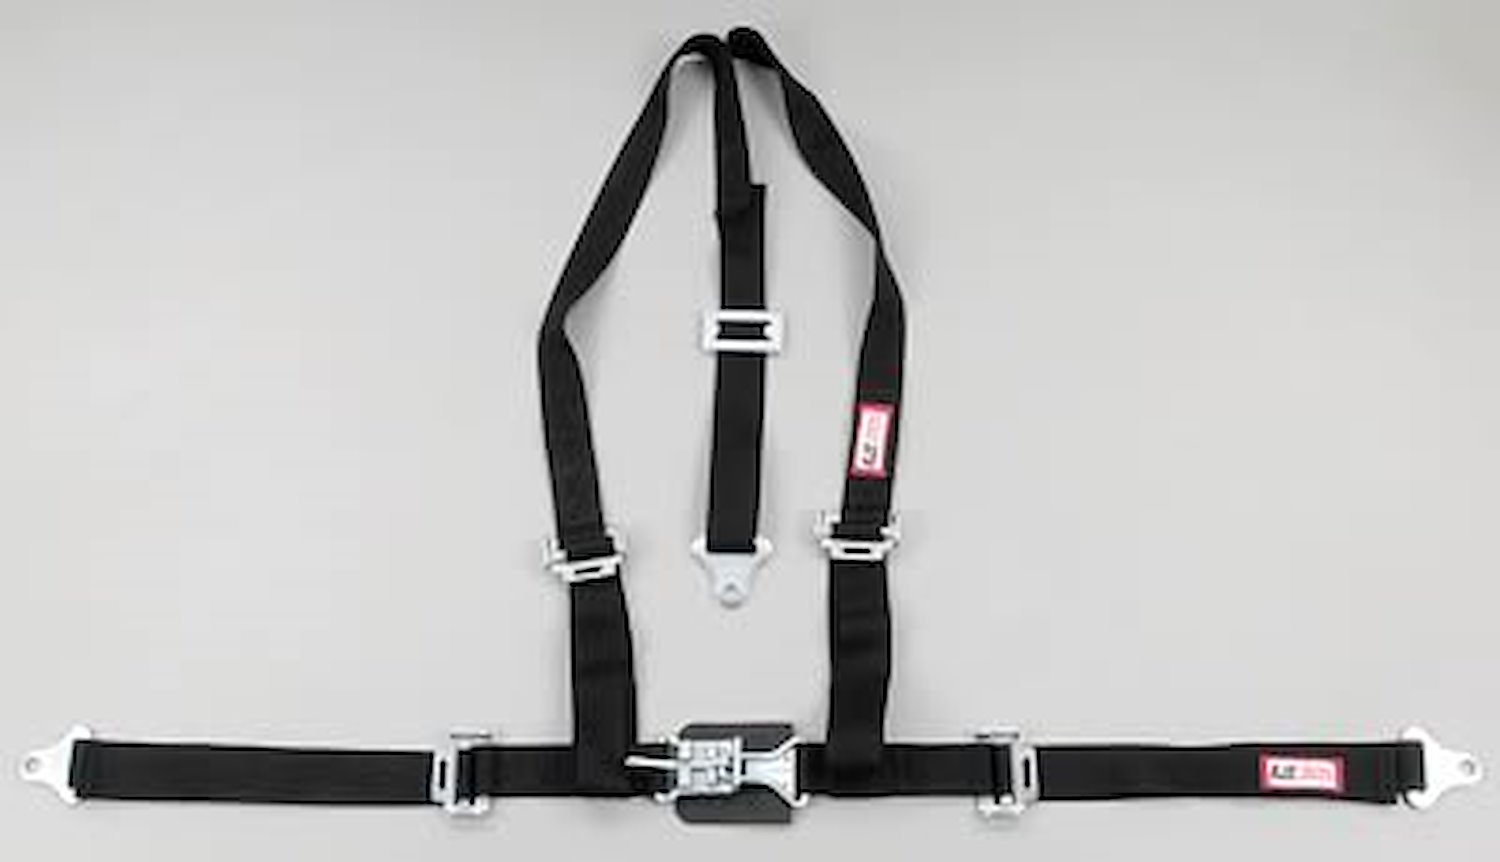 NON-SFI L&L HARNESS 3 PULL UP Lap Belt SEWN IN 2 Shoulder Harness V ROLL BAR Mount w/STERNUM STRAP ALL WRAP ENDS BLUE